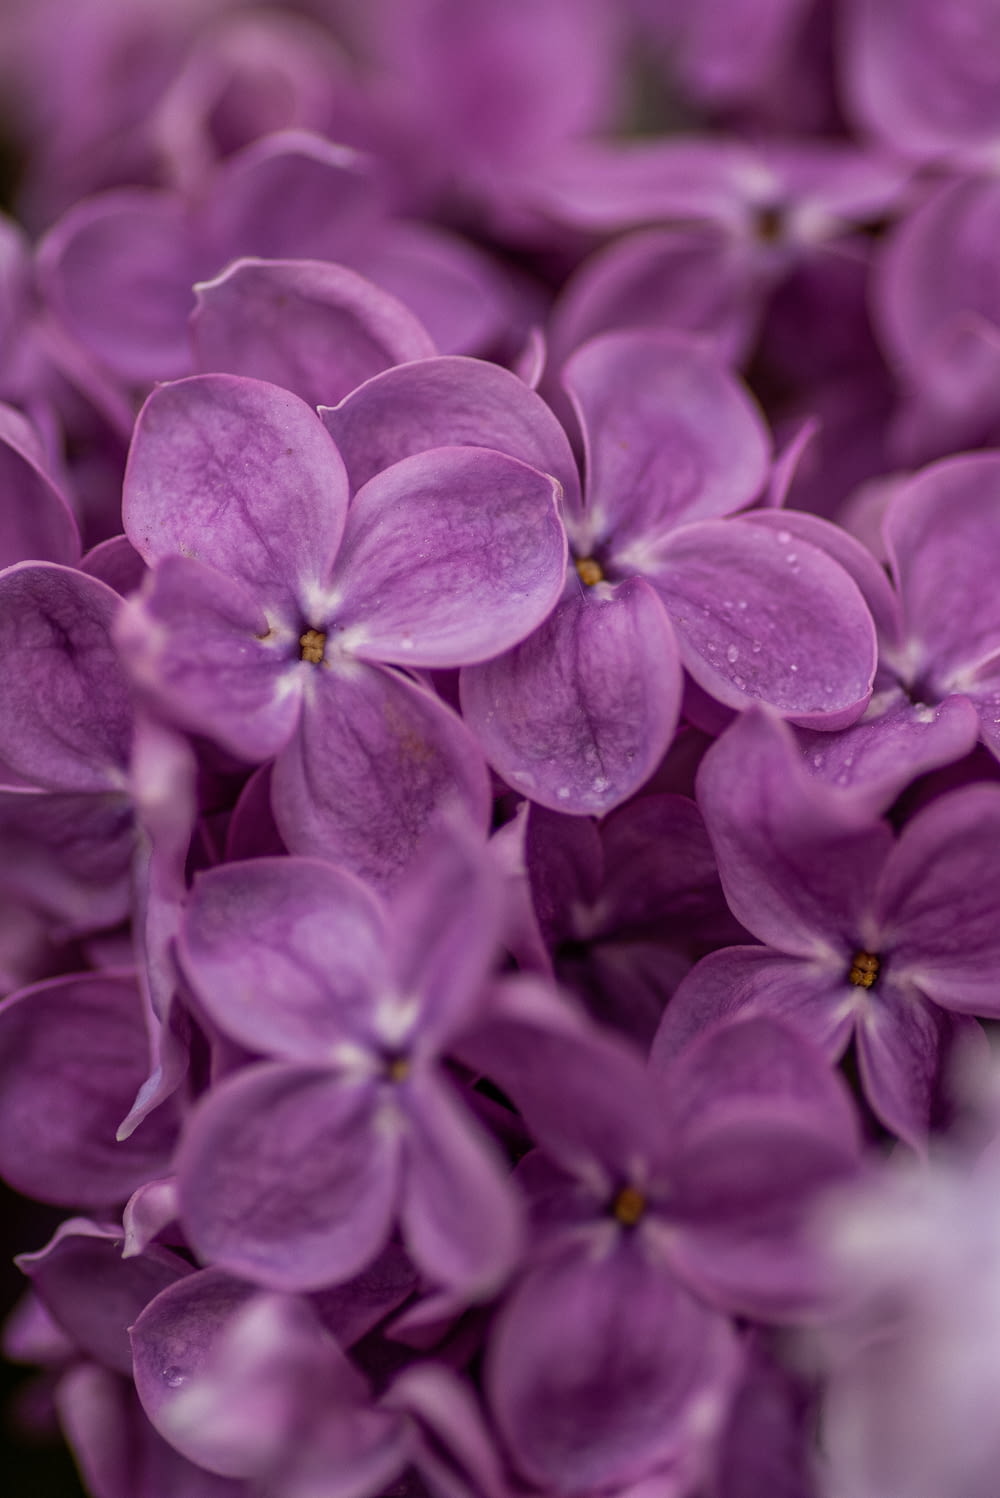 close-up photography of purple petaled flowers